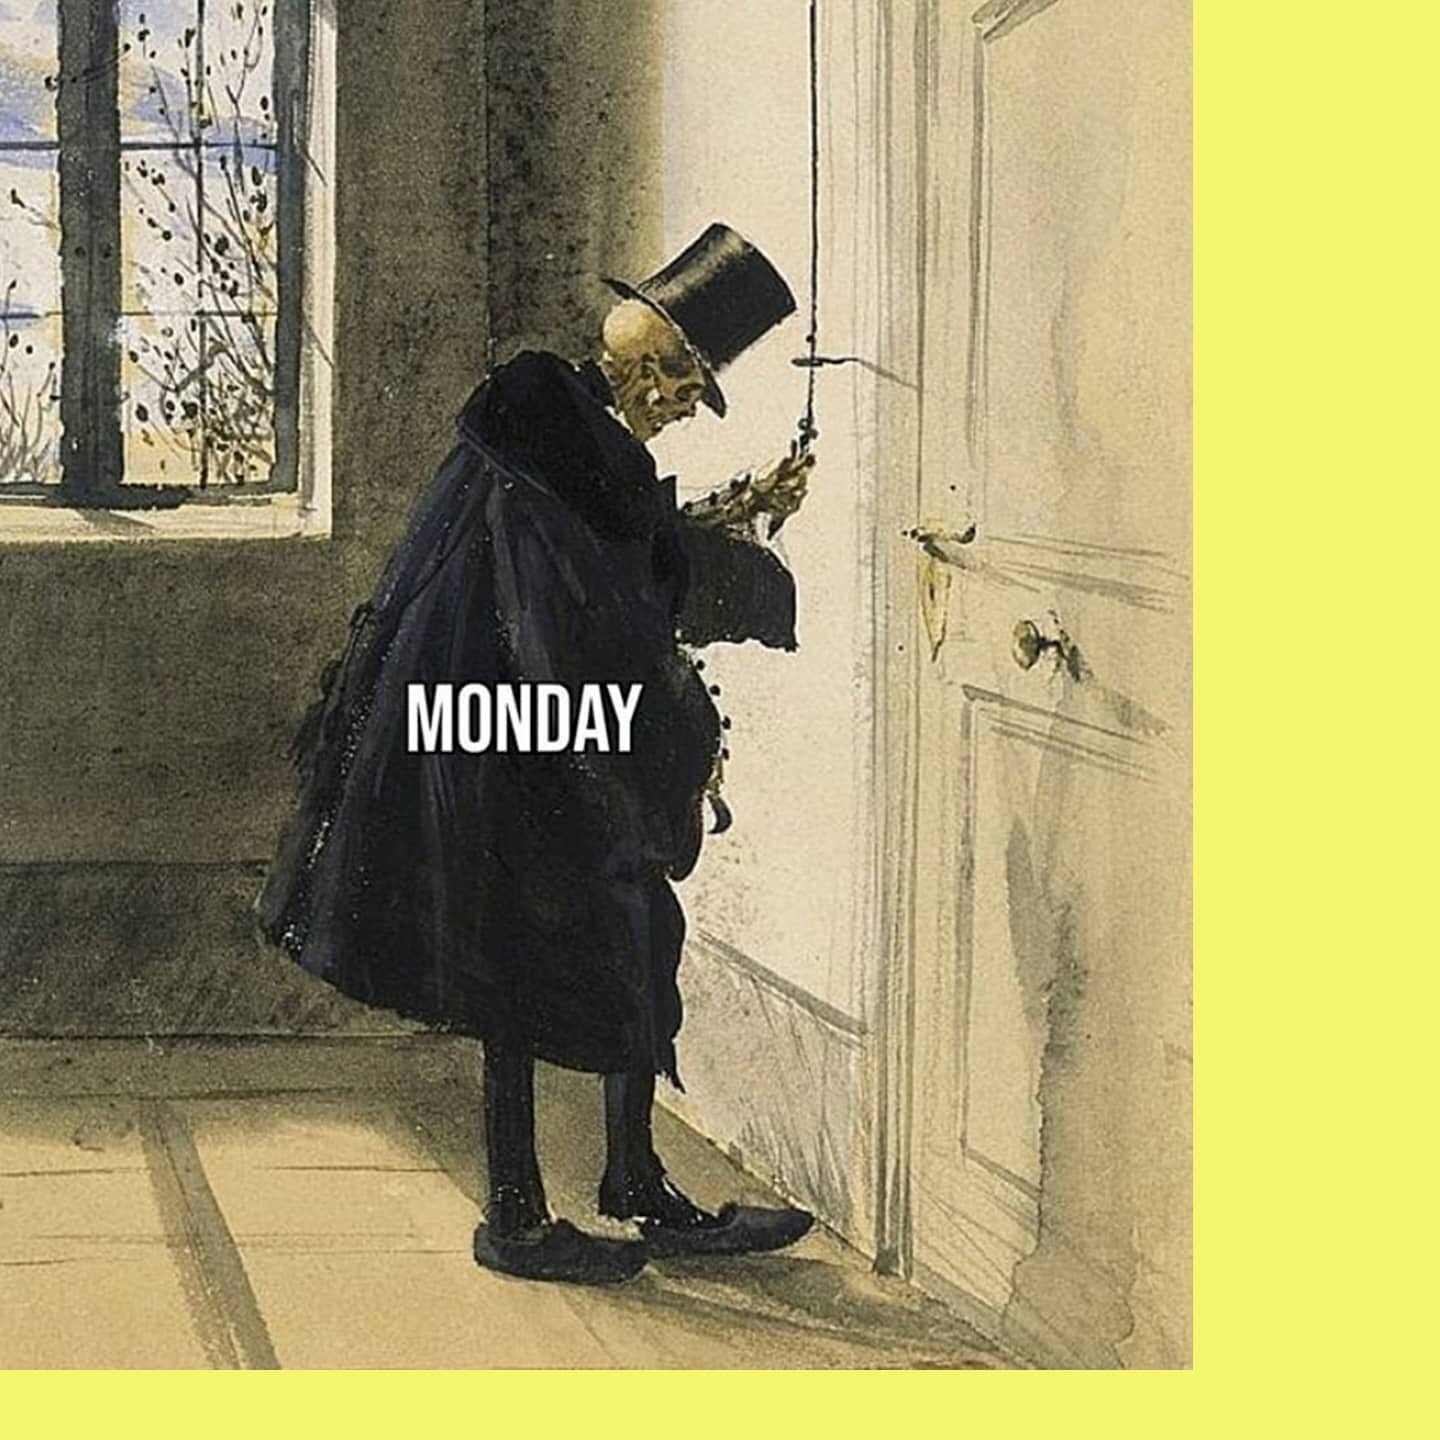 Knock knock! Who's there❔ MONDAY! ☠️💩👻
.
.
.
#freelancedesigner #mediadesign #graphicdesign #design #typography #designfeed #puzzlefeed #quote #selfemployed #freelancer  #lifeofagraphicdesigner #mondaymood #mondayblues #classicmemelord